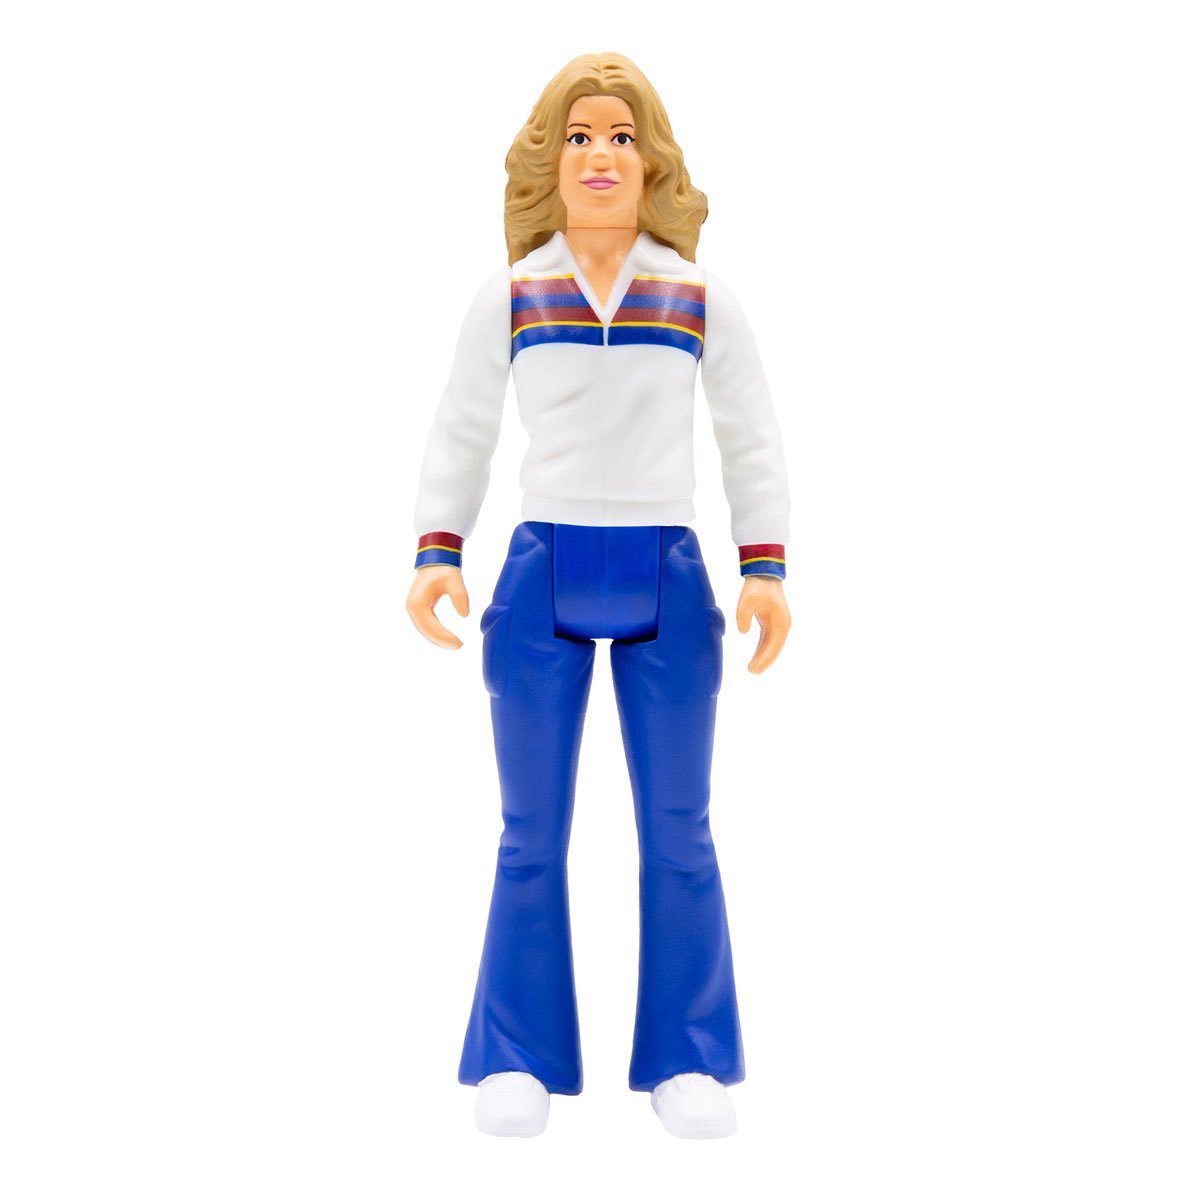 Sold at Auction: Group of 3 Bionic Woman Action Figures